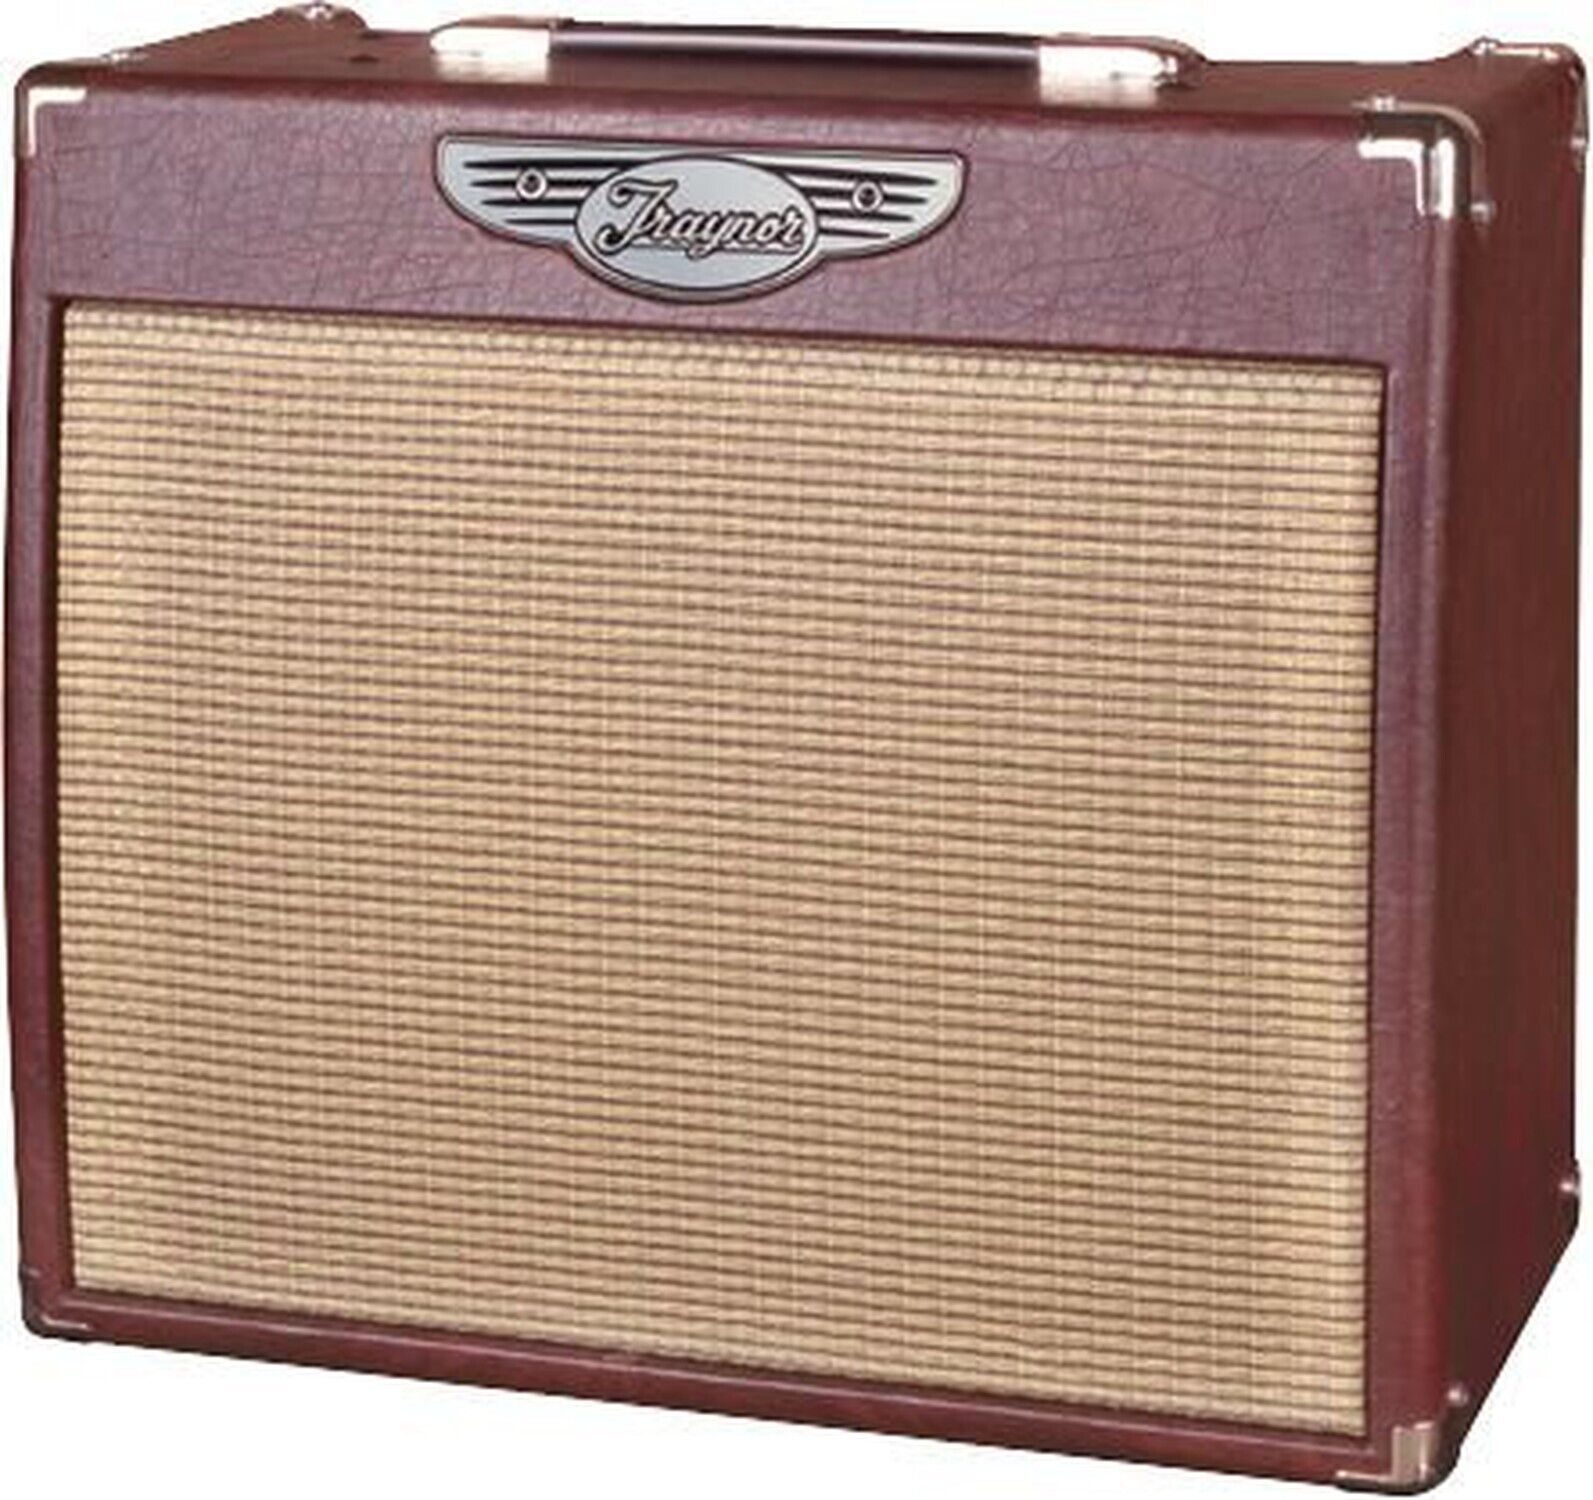 Traynor YCV20WR Guitar Amp in Wine Red